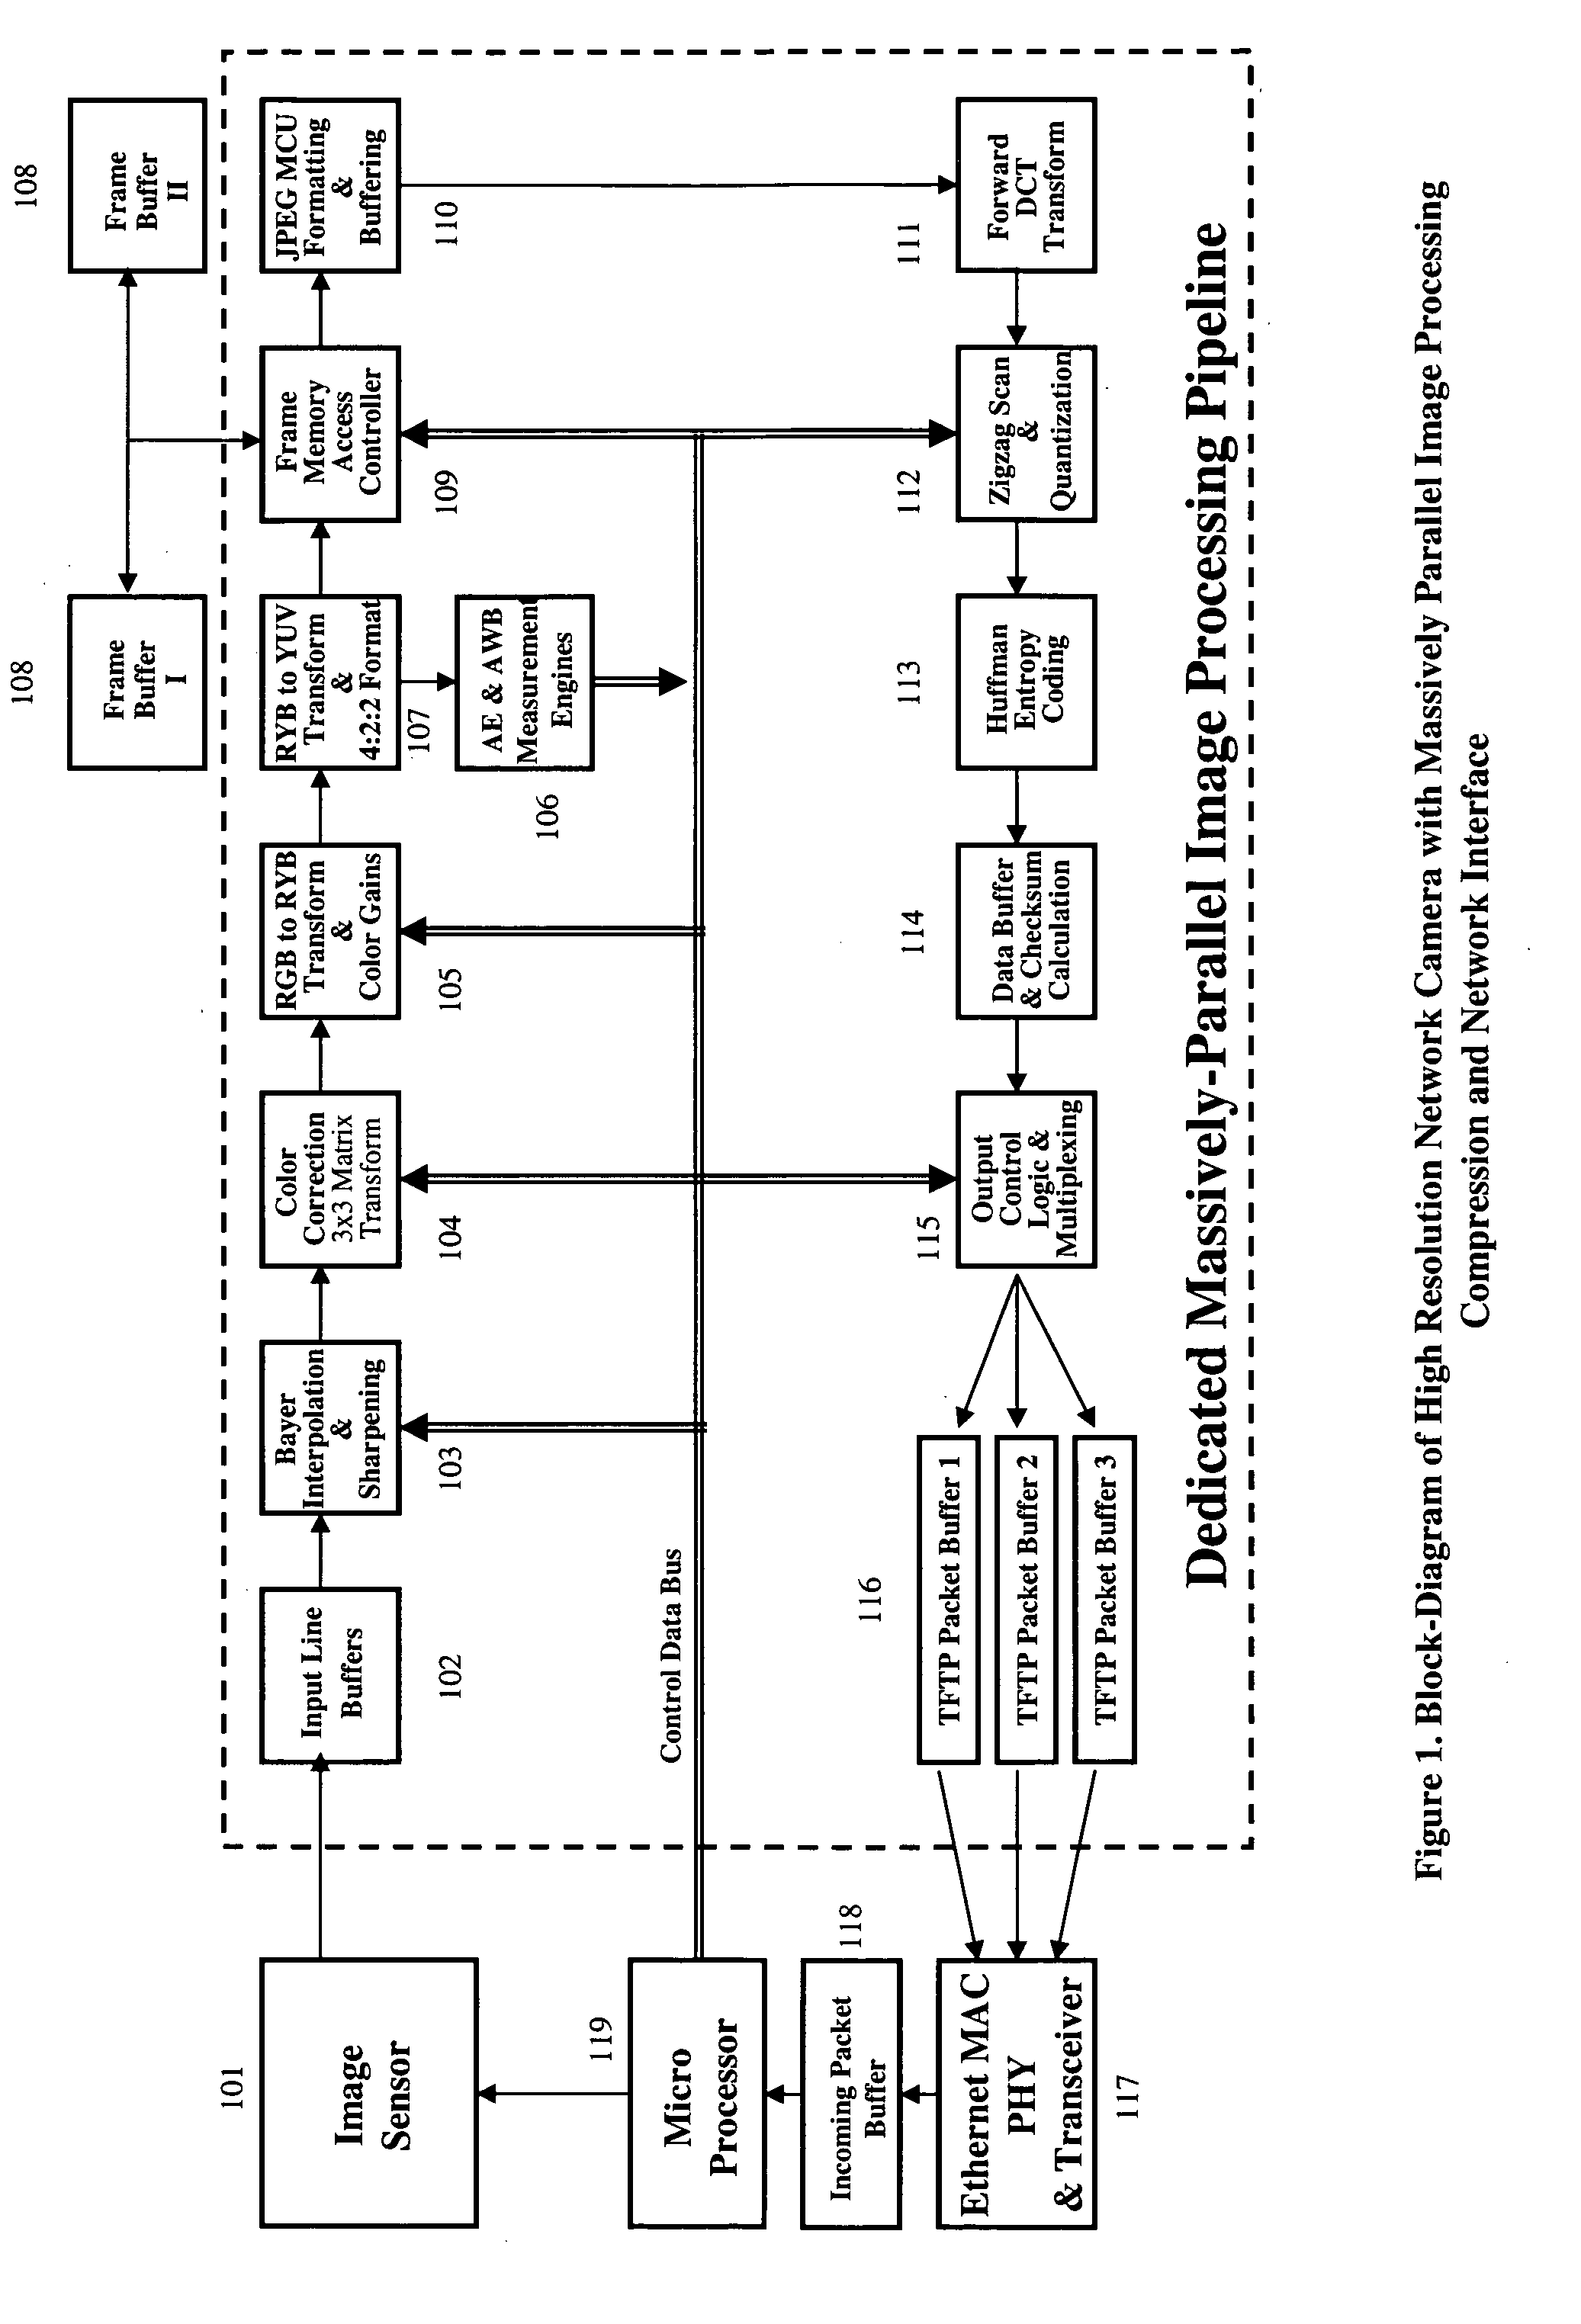 High resolution network video camera with massively parallel implementation of image processing, compression and network server